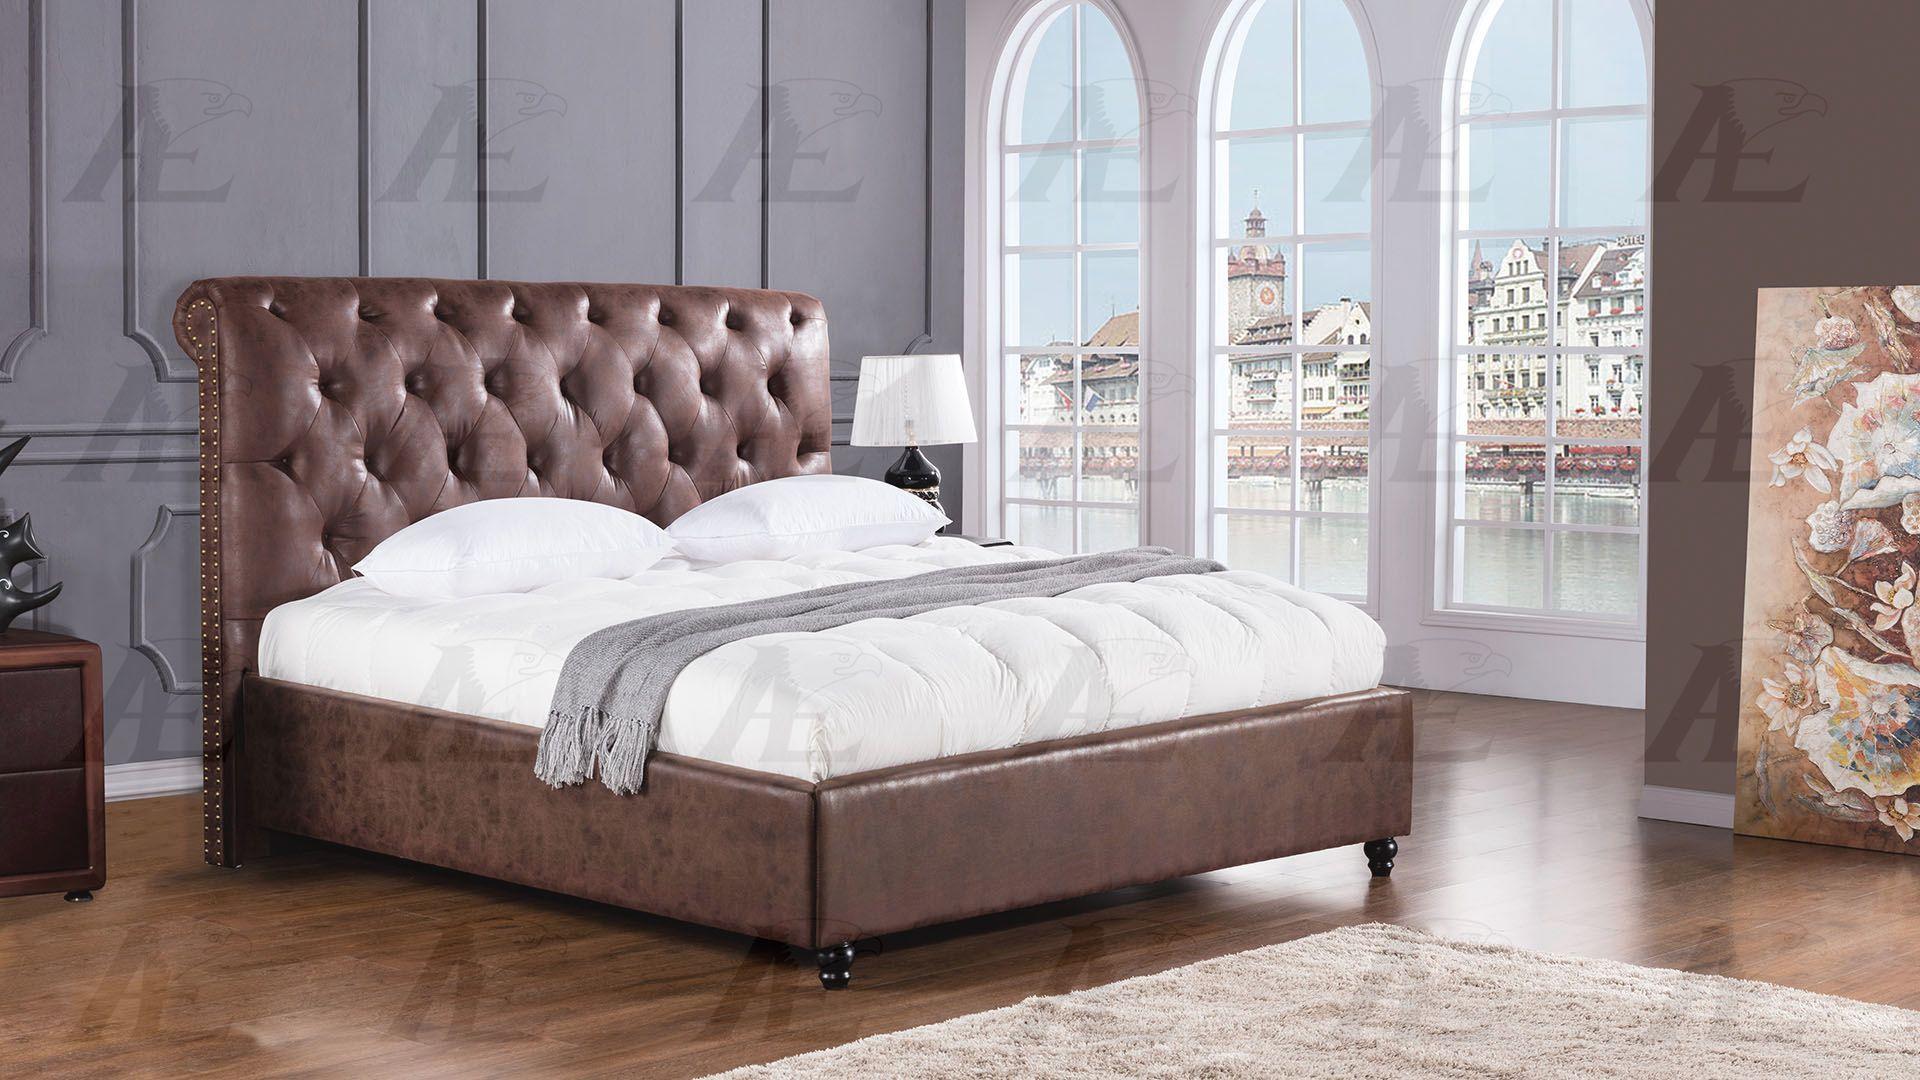 

    
Brown Leather Air Queen Size Bed Tufted Headboard American Eagle B-D061
